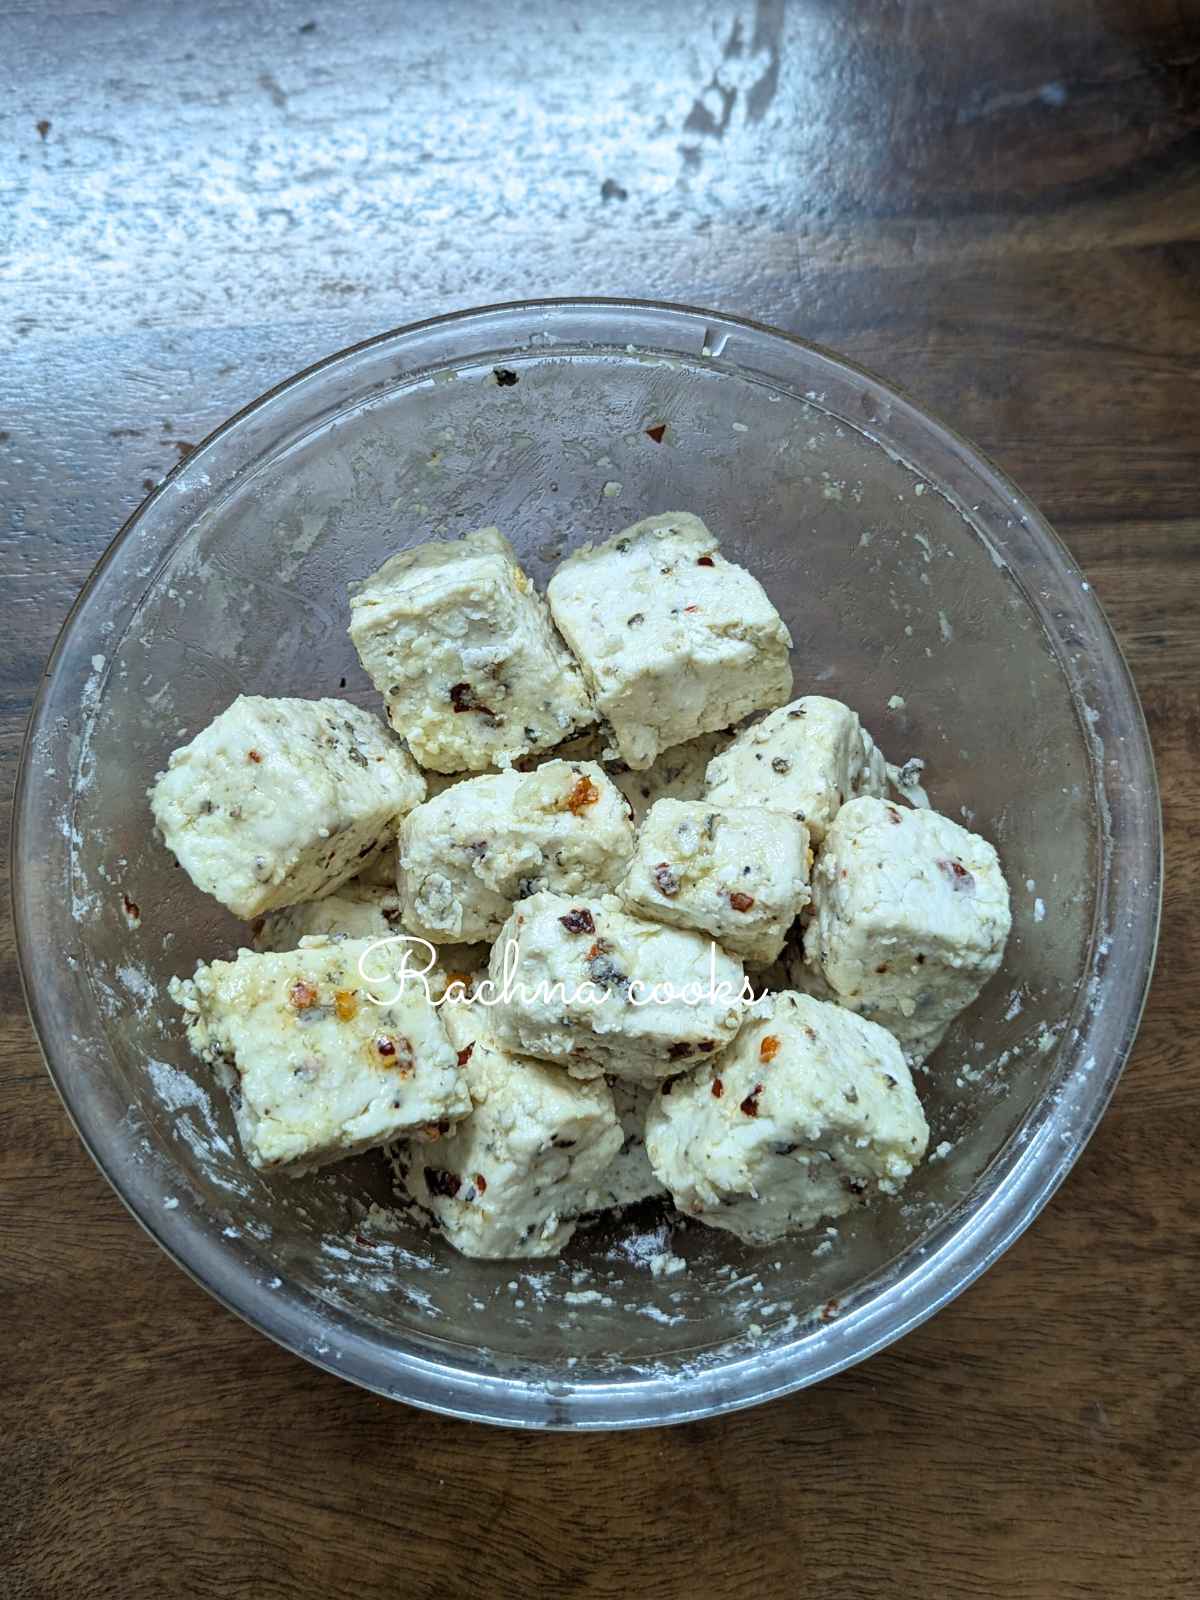 Tofu cubes coated with cornstarch and spices.